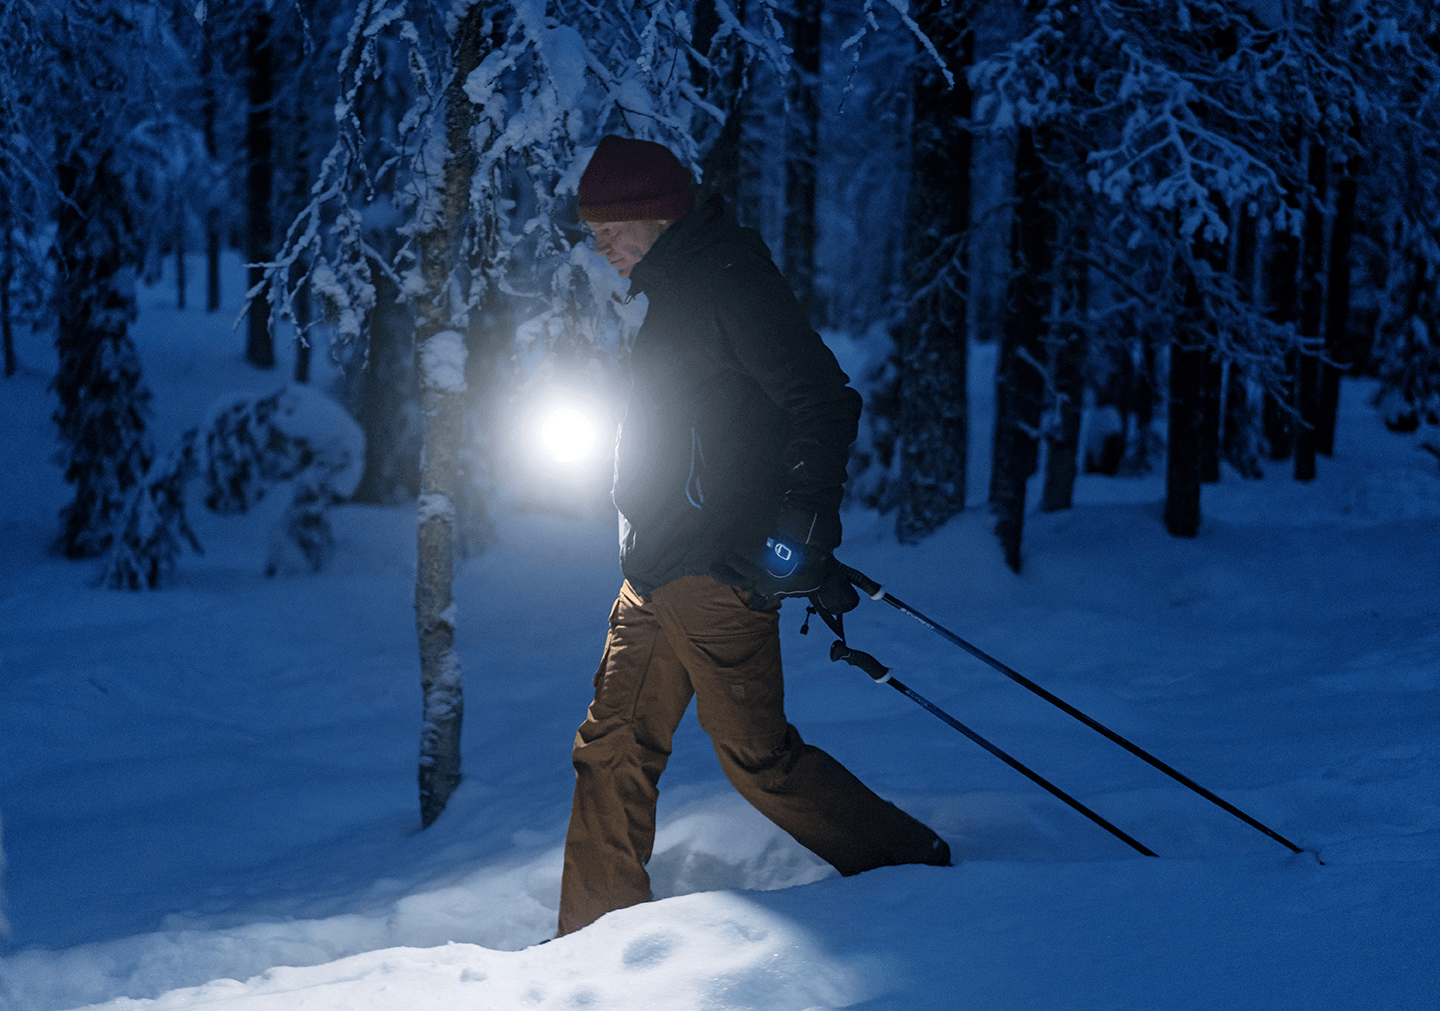 A person skiing in the dark with a lamp.